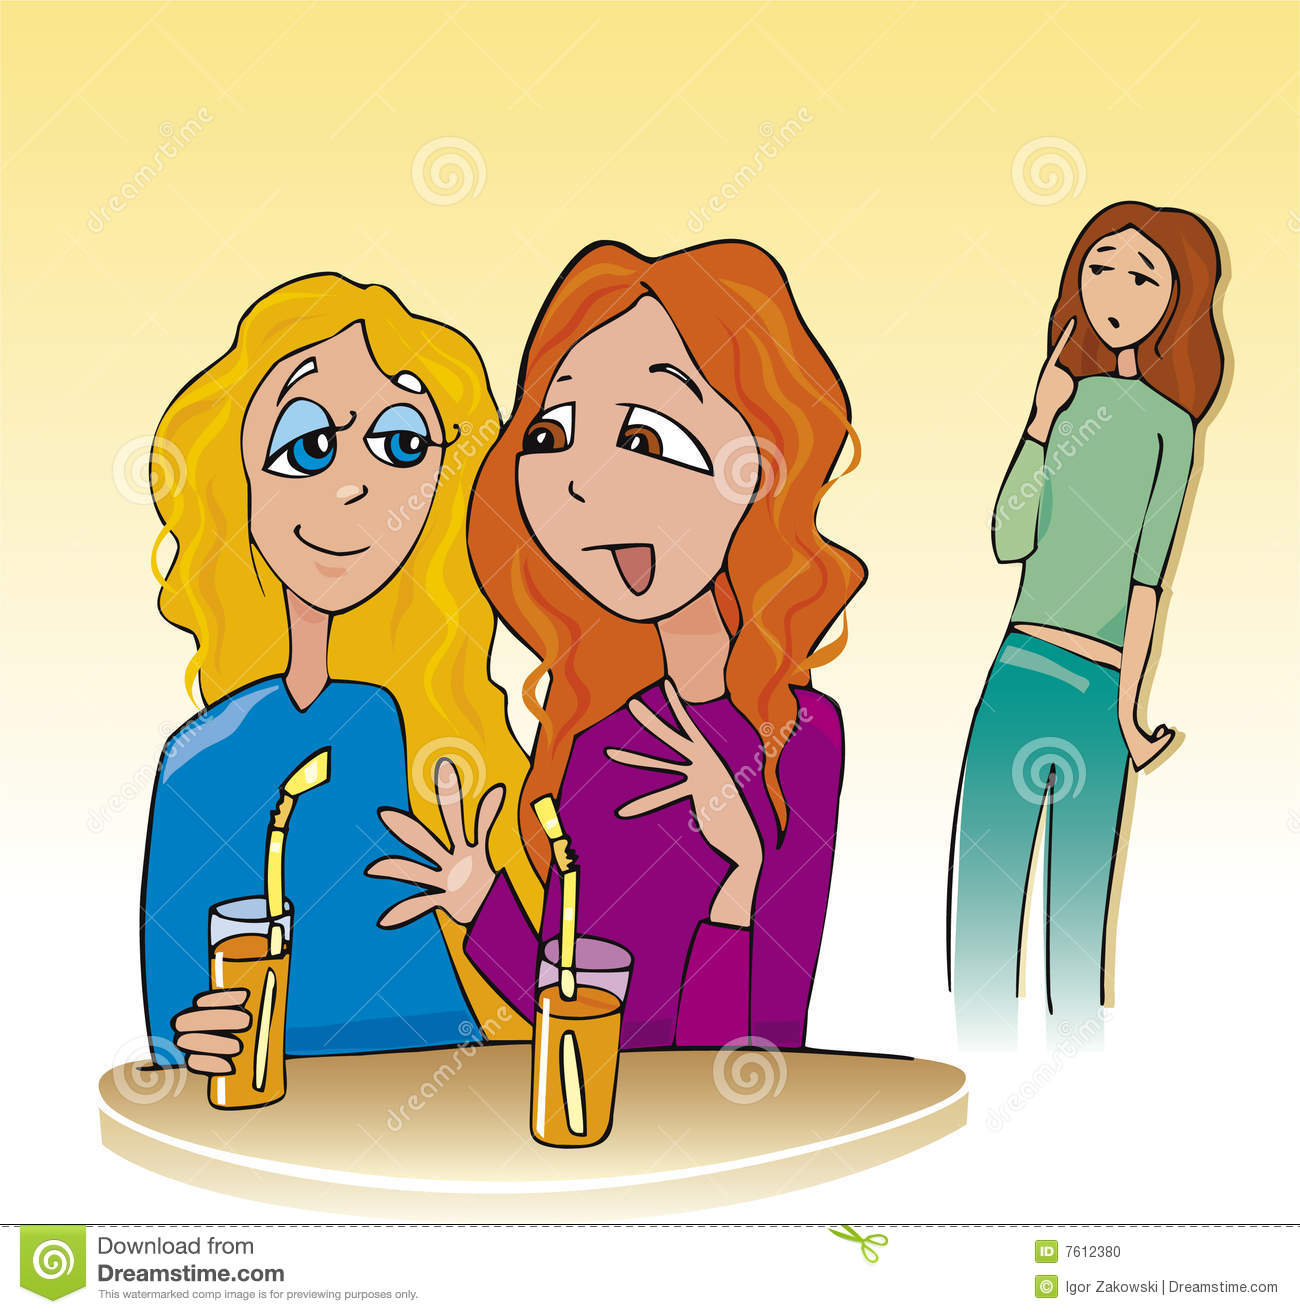 Cartoon Illustration Of Two Girls Talking And Third Girl Listening To